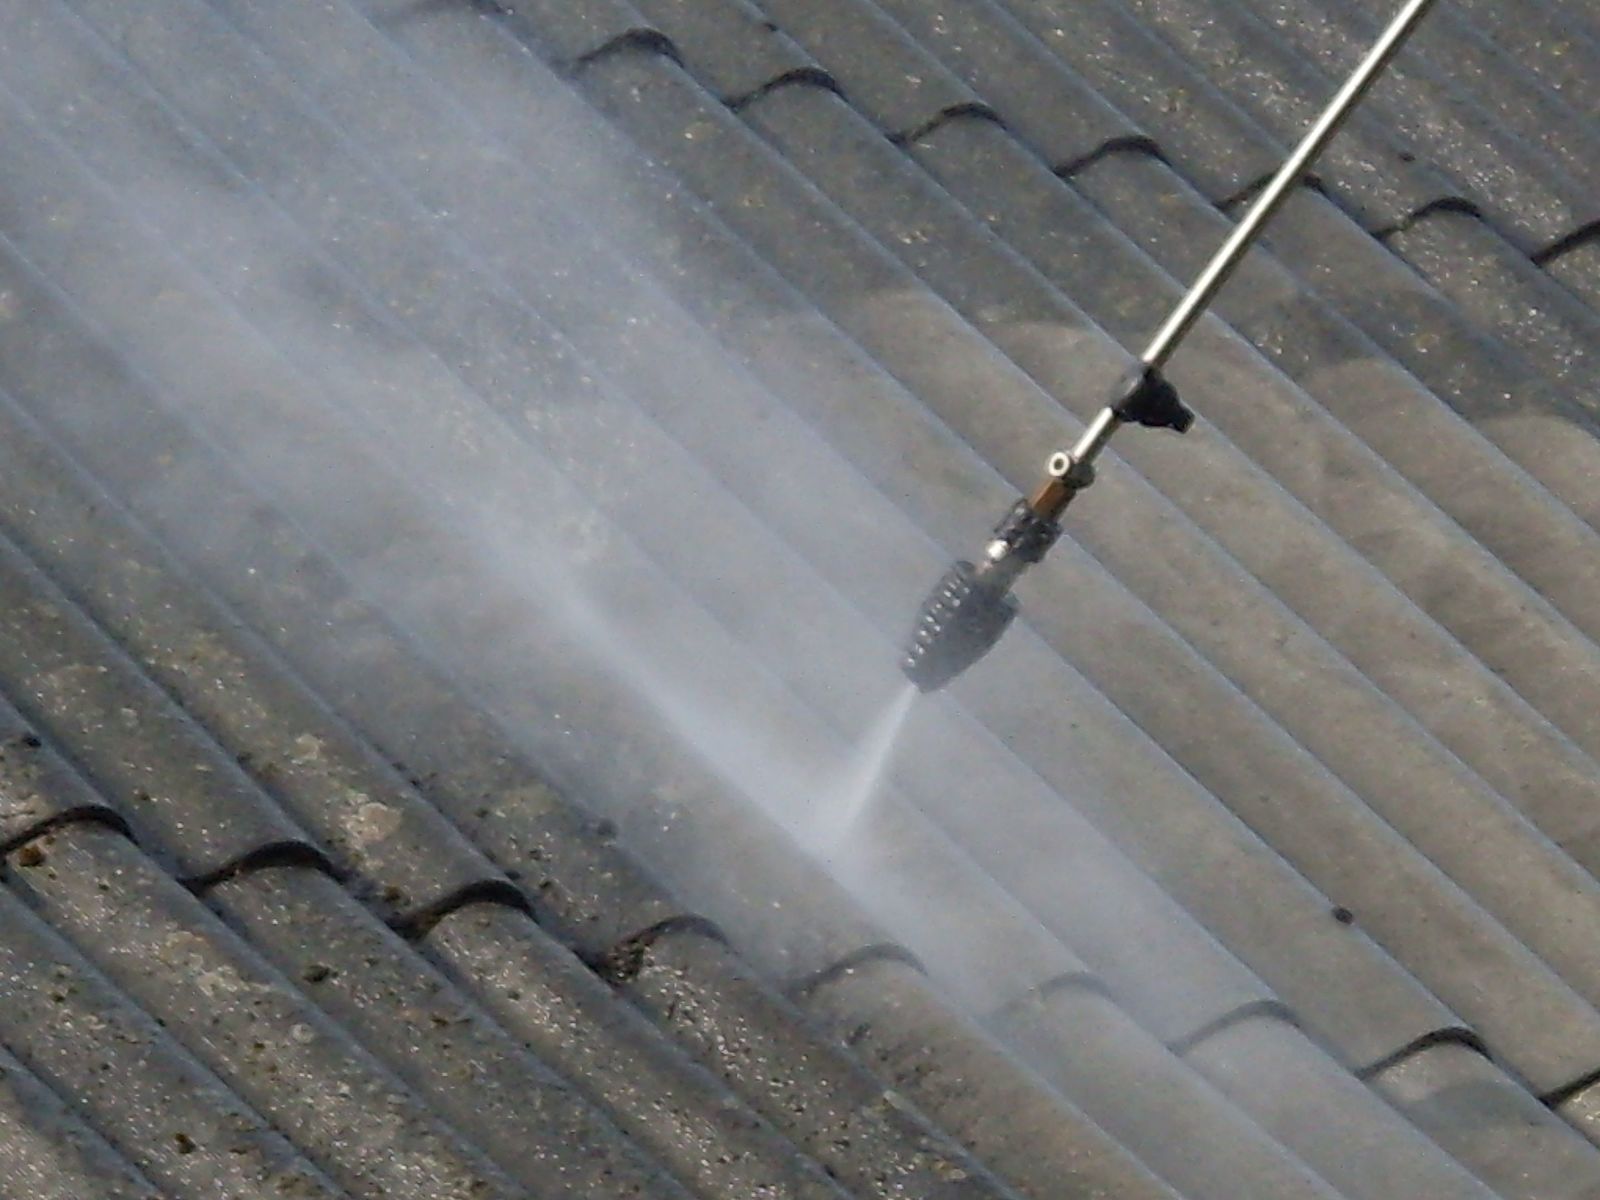 Pressure Wash Your Home For The Ultimate Spring Clean - MamaSuds